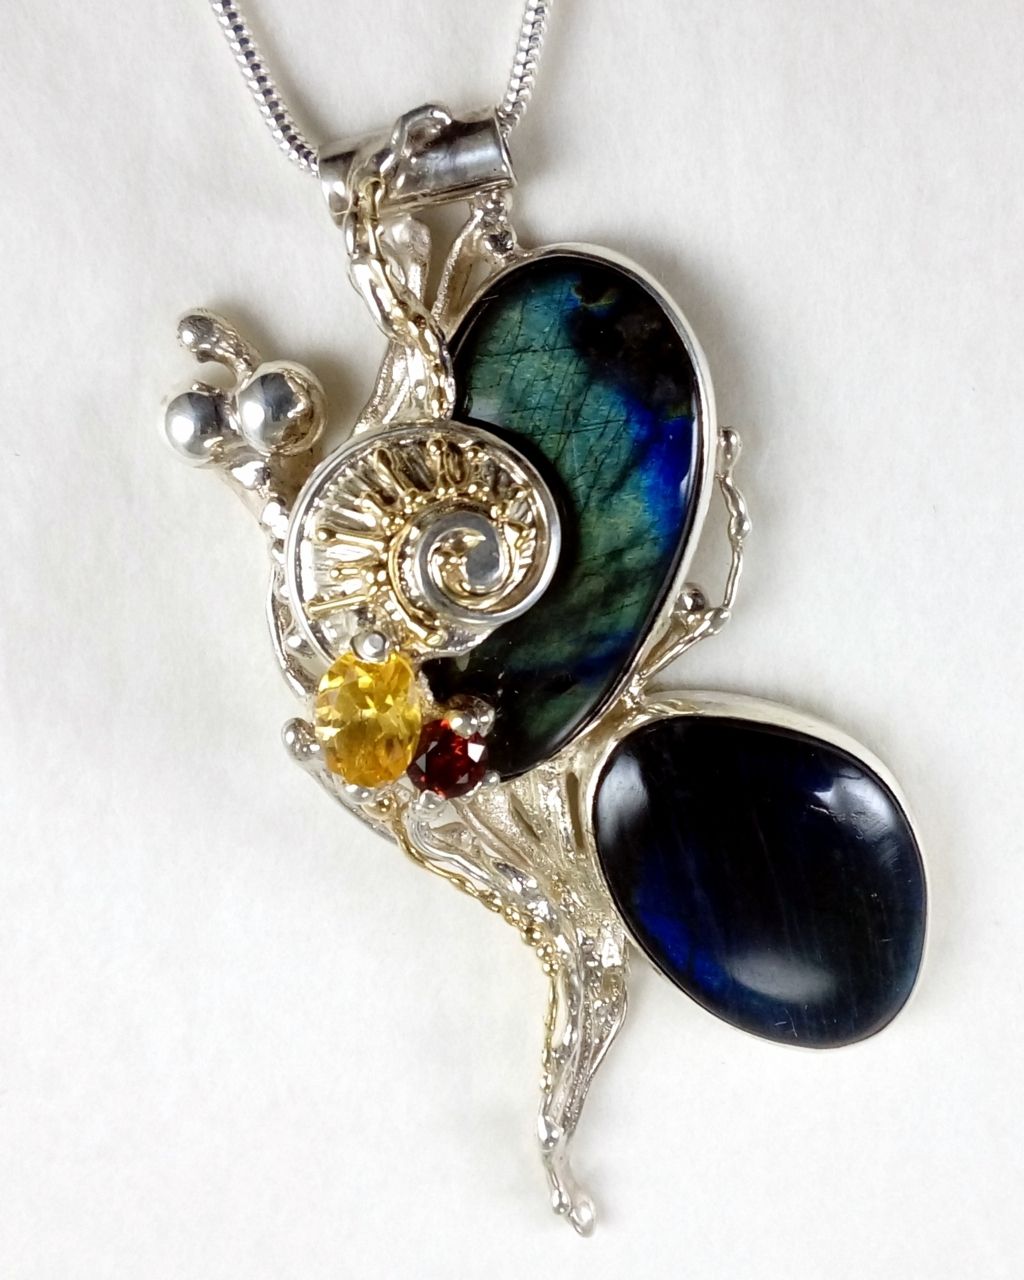 Gregory Pyra Piro pendant 35843, contemporary fine artisan jewellery, silver and gold jewelry with facet cut stones, jewelry with real pearls and color stones, contemporary jewellery collectible, artisan jewelry with semi precious stones, pendant with labradorite, pendant with citirne and garnet, pendants sold in art galleries